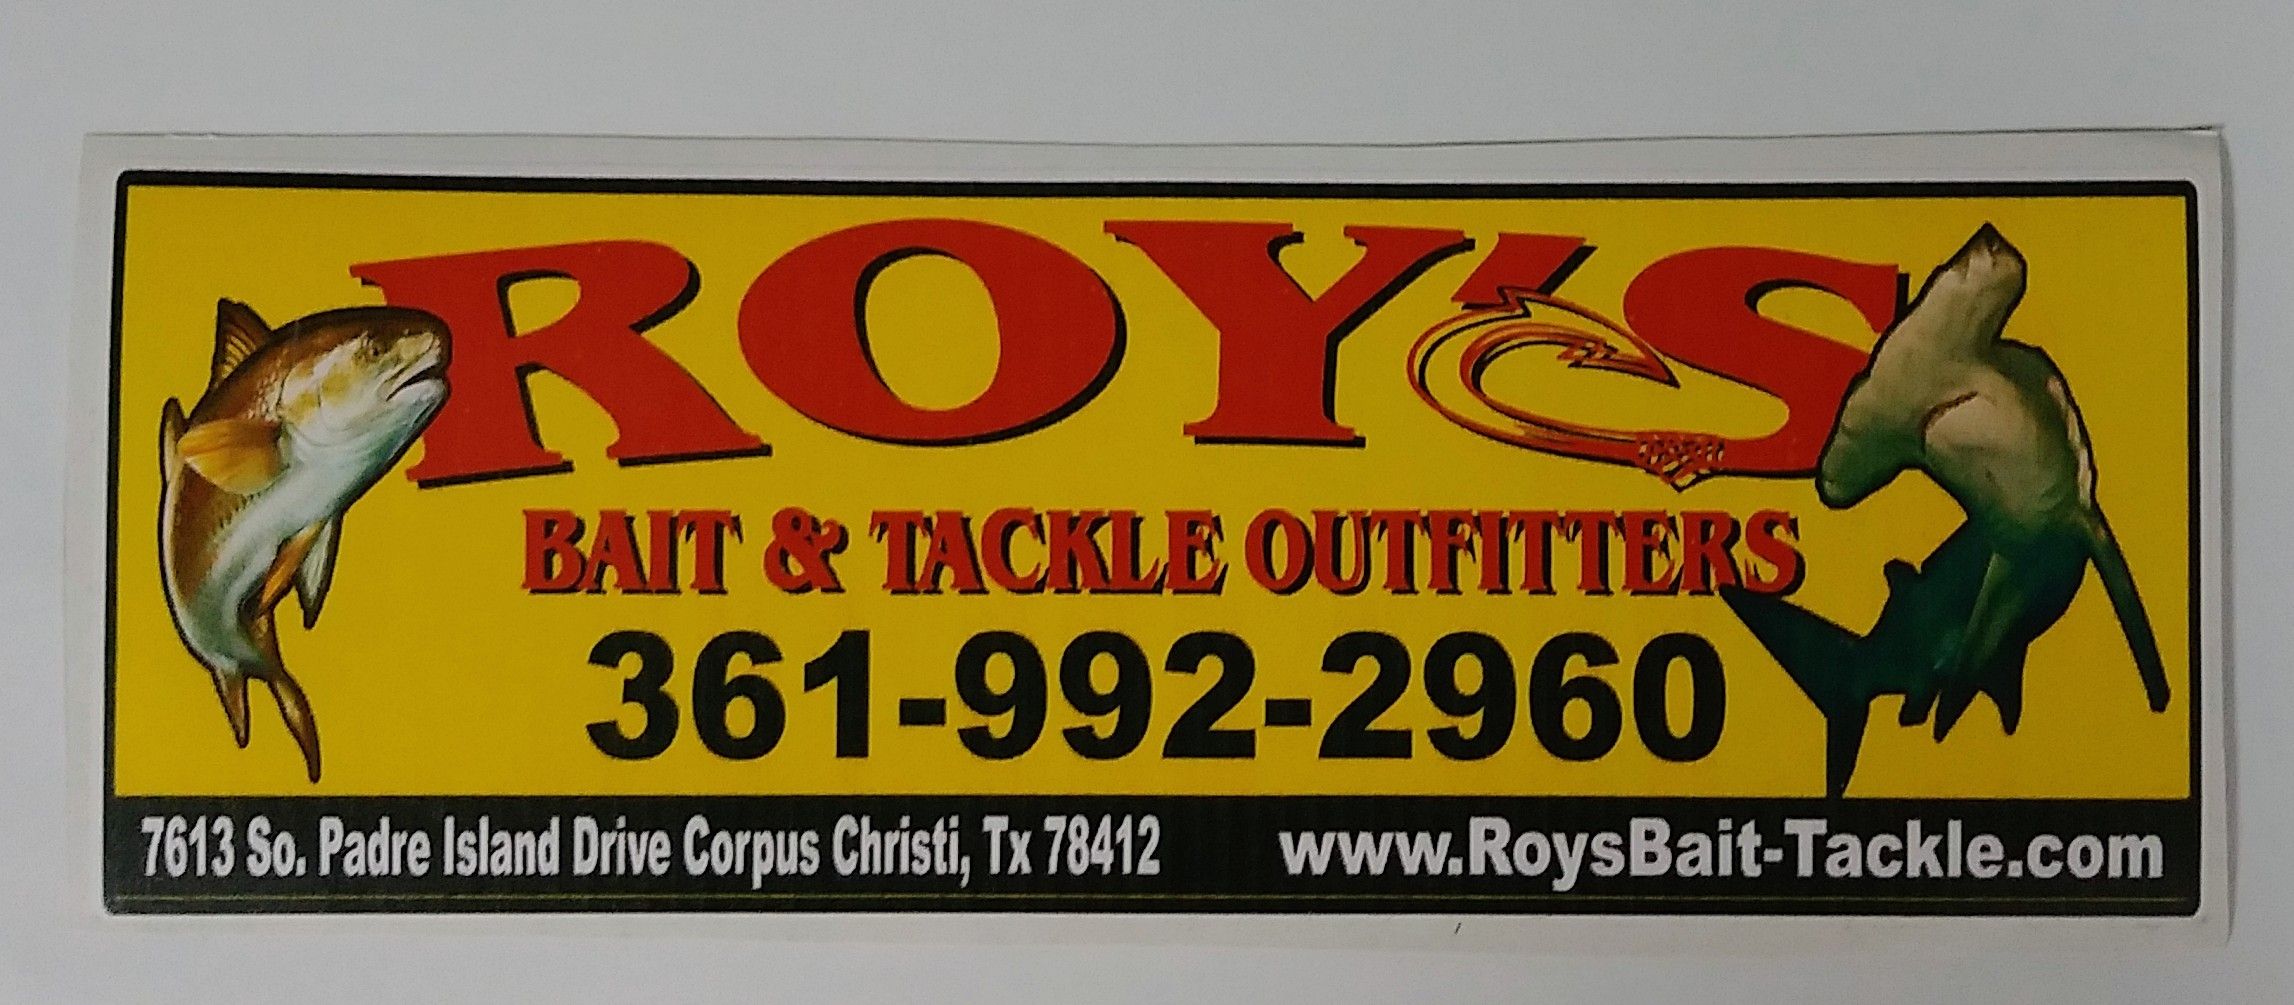 Roy's Bait & Tackle Stickers